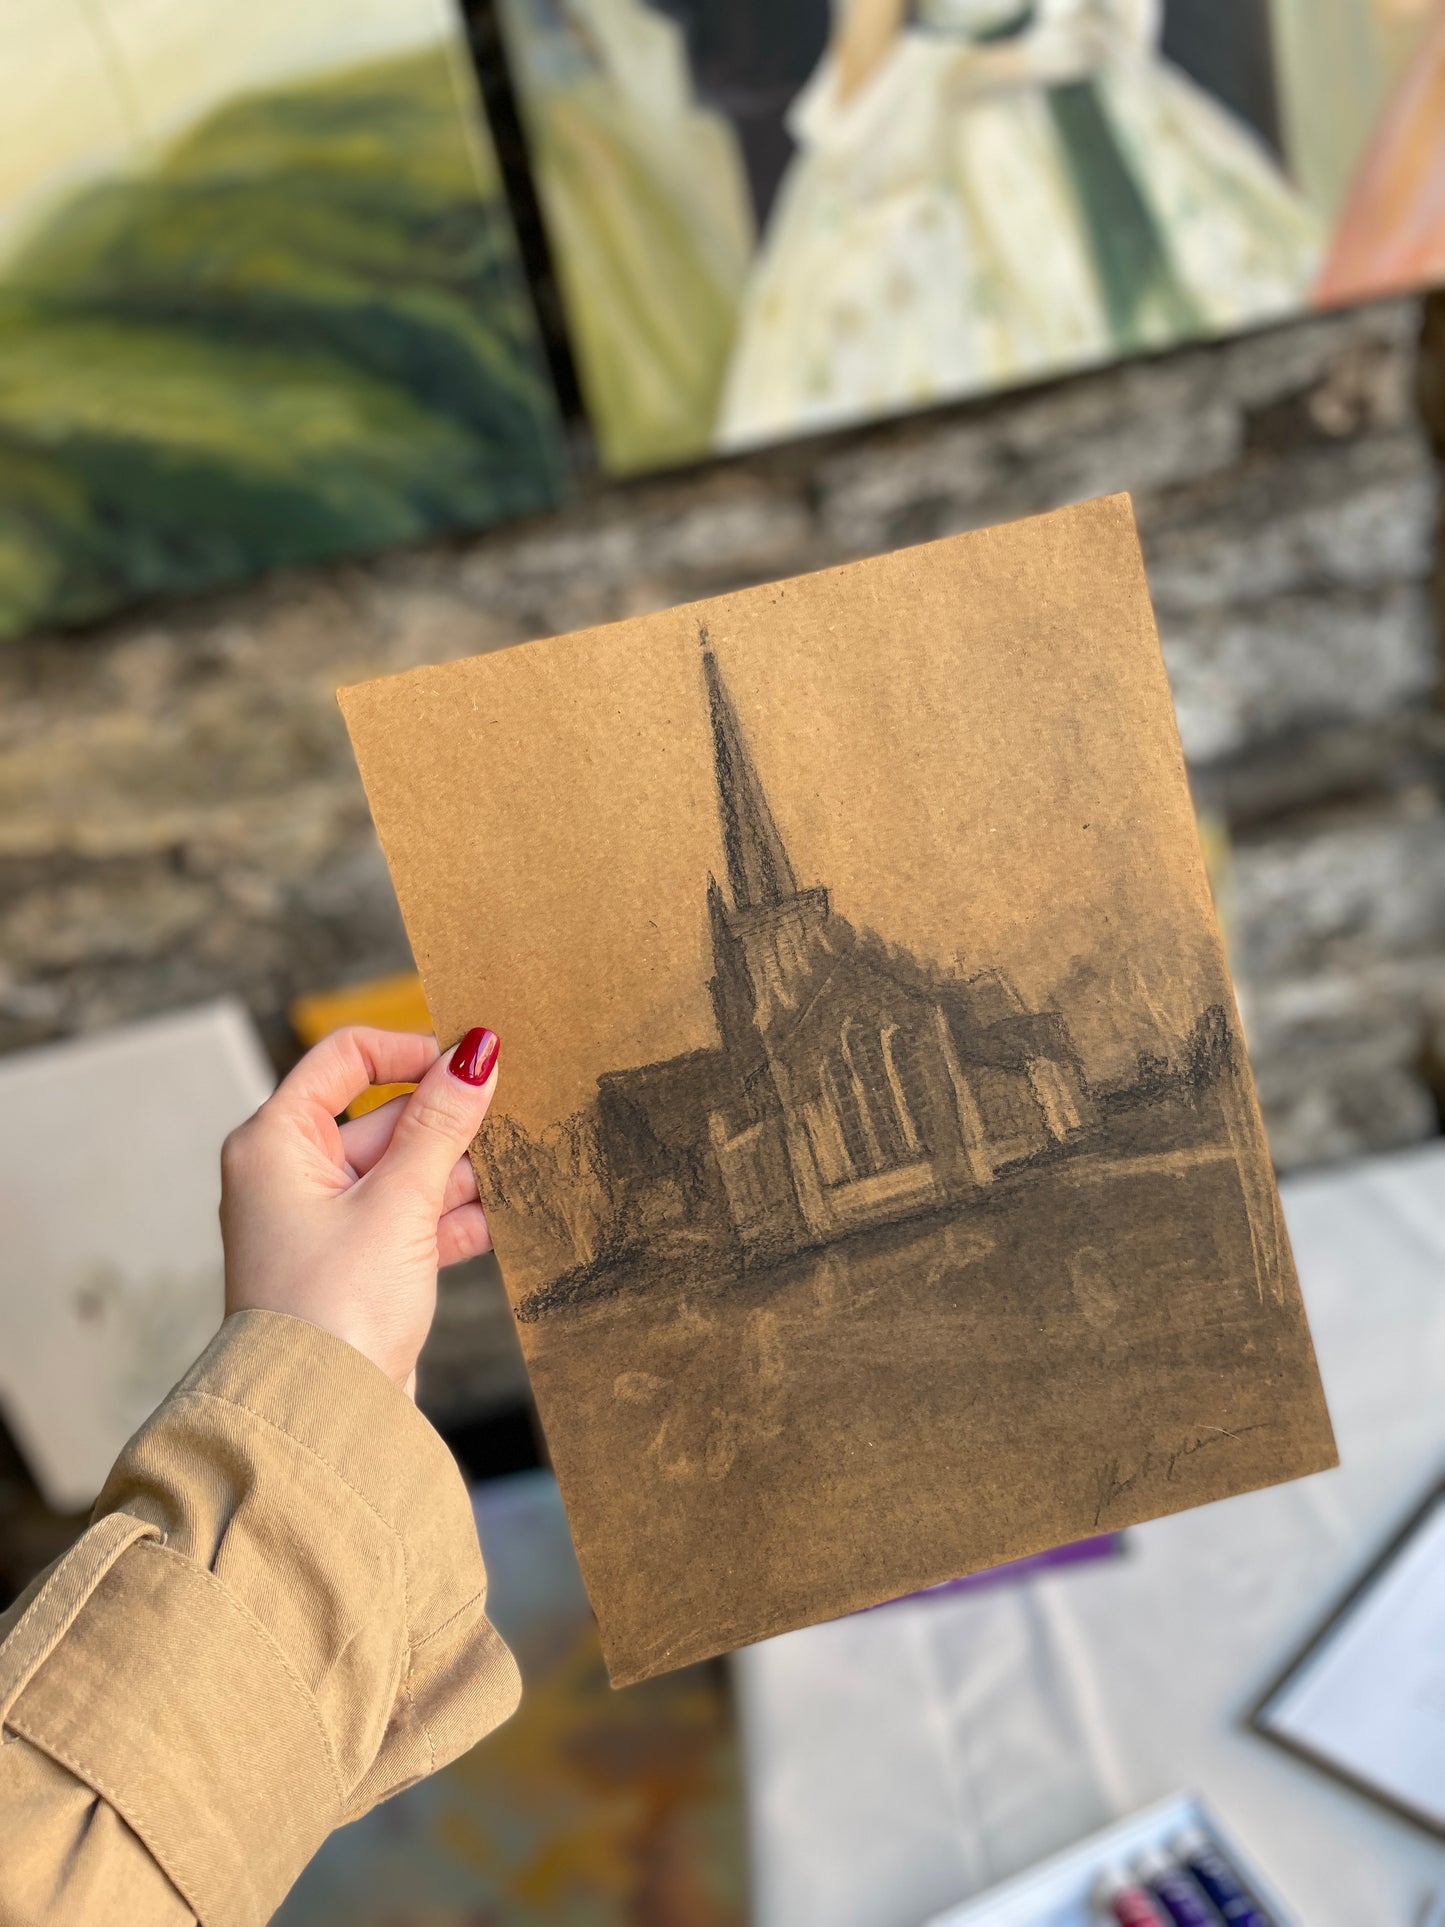 Beautifully textured charcoal drawing of church